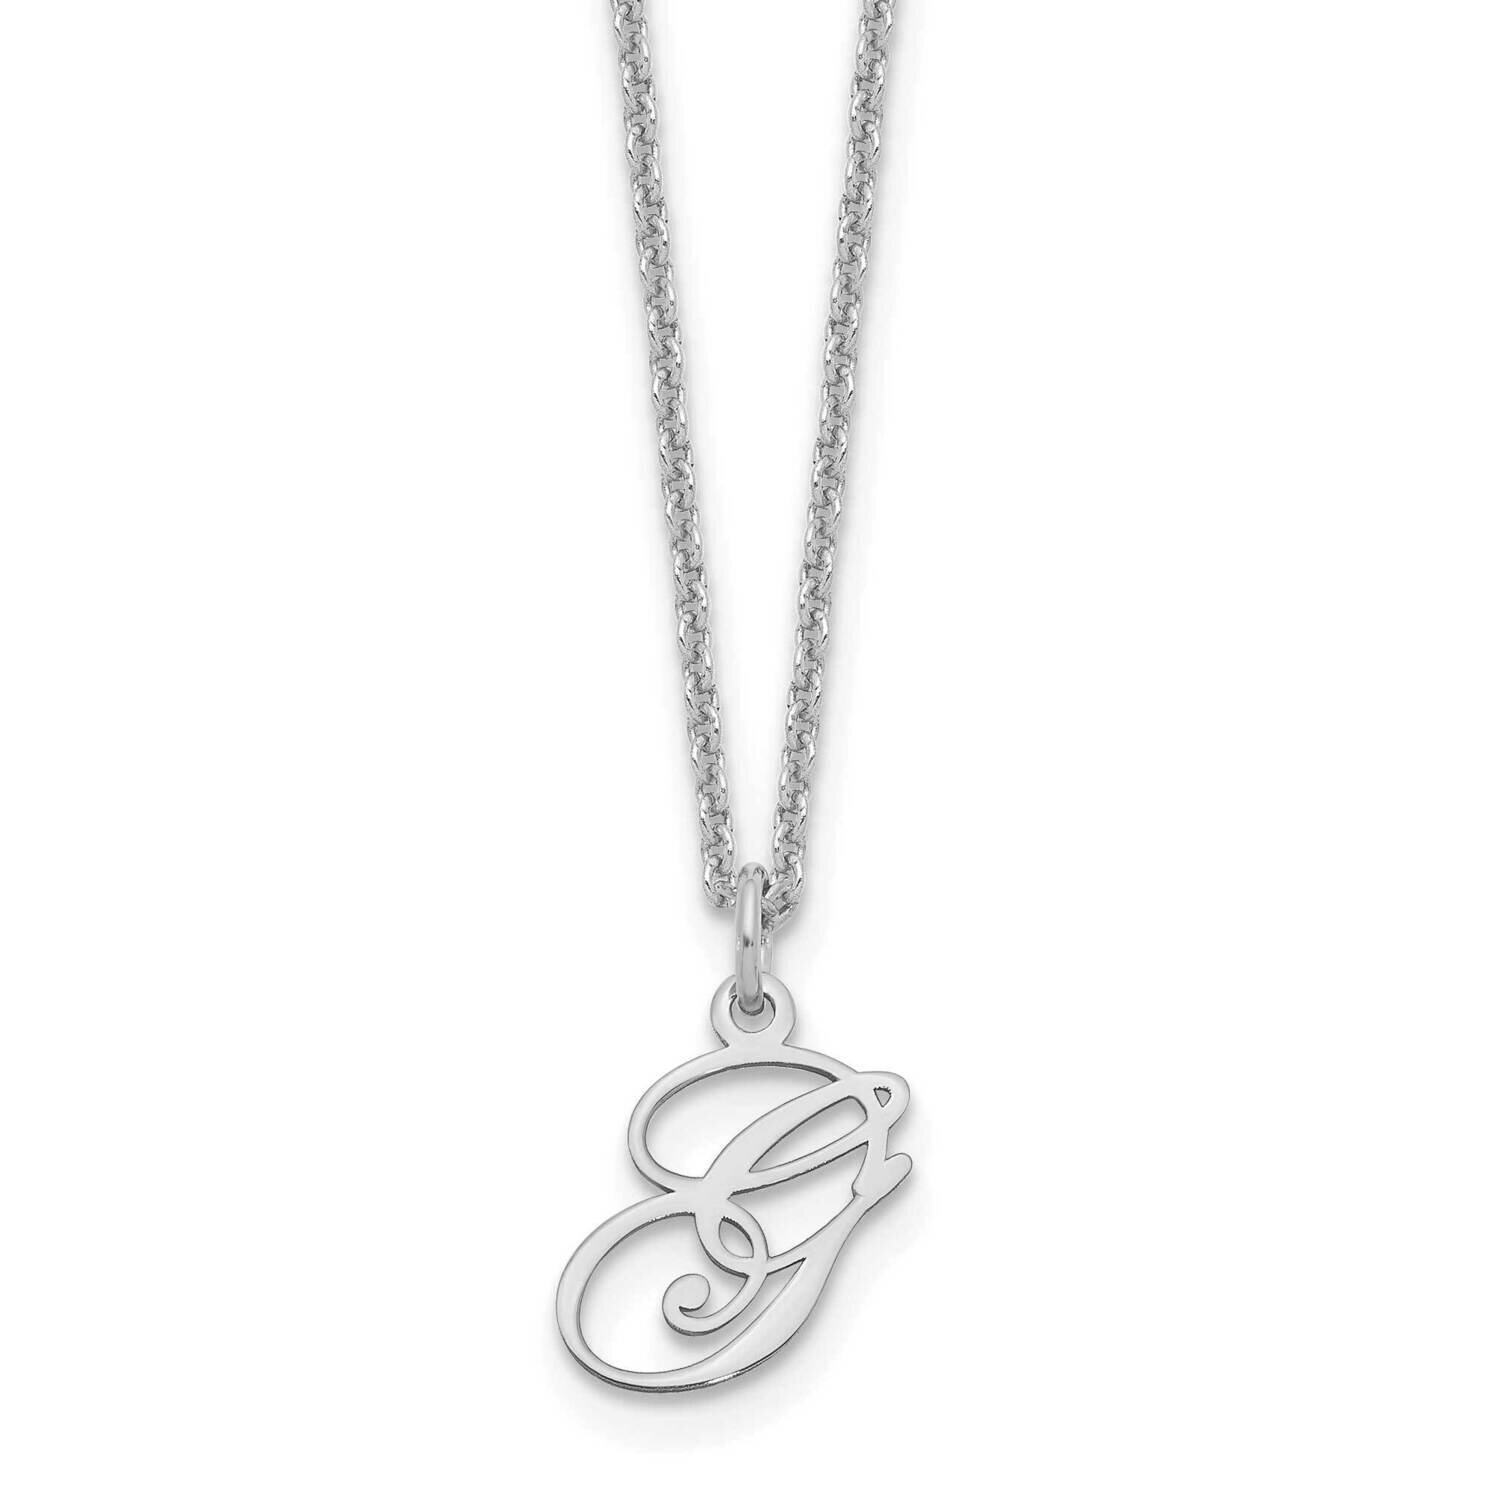 Letter G Initial Necklace 14k White Gold XNA756W/G